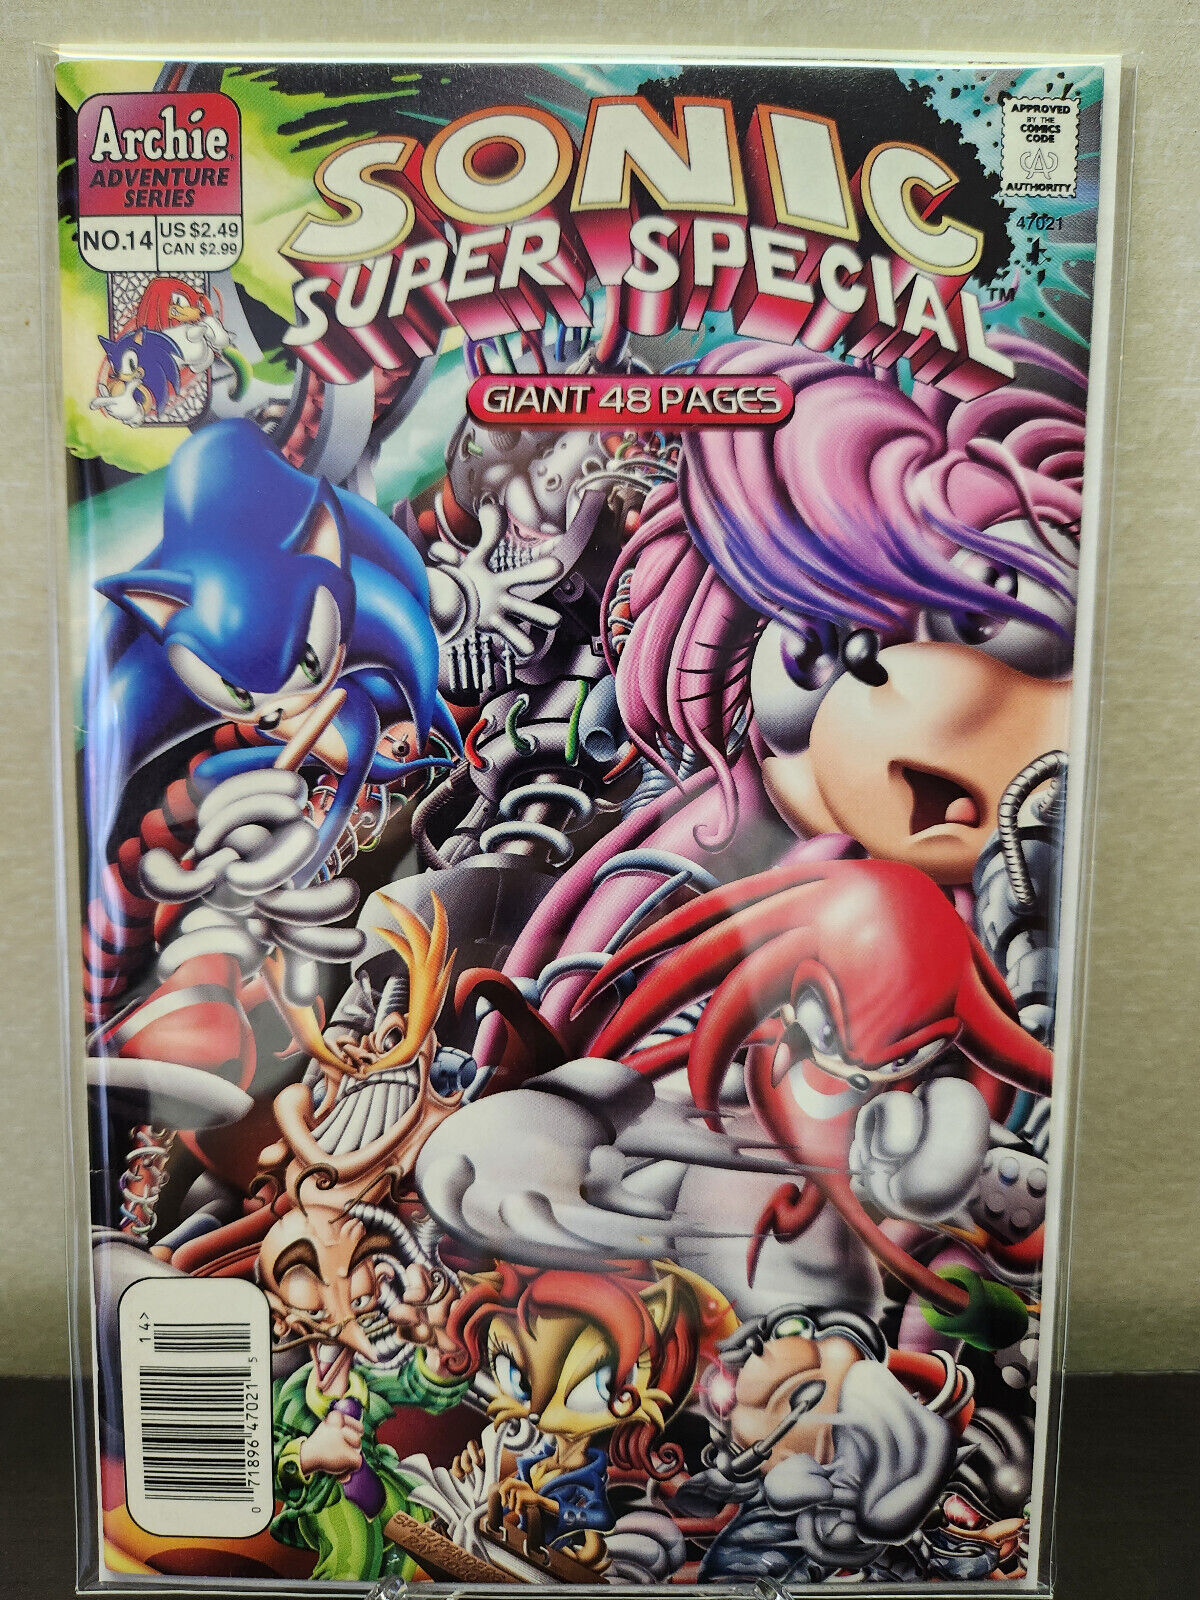 Sonic Super Special #14 Best of Times - Archie Comics